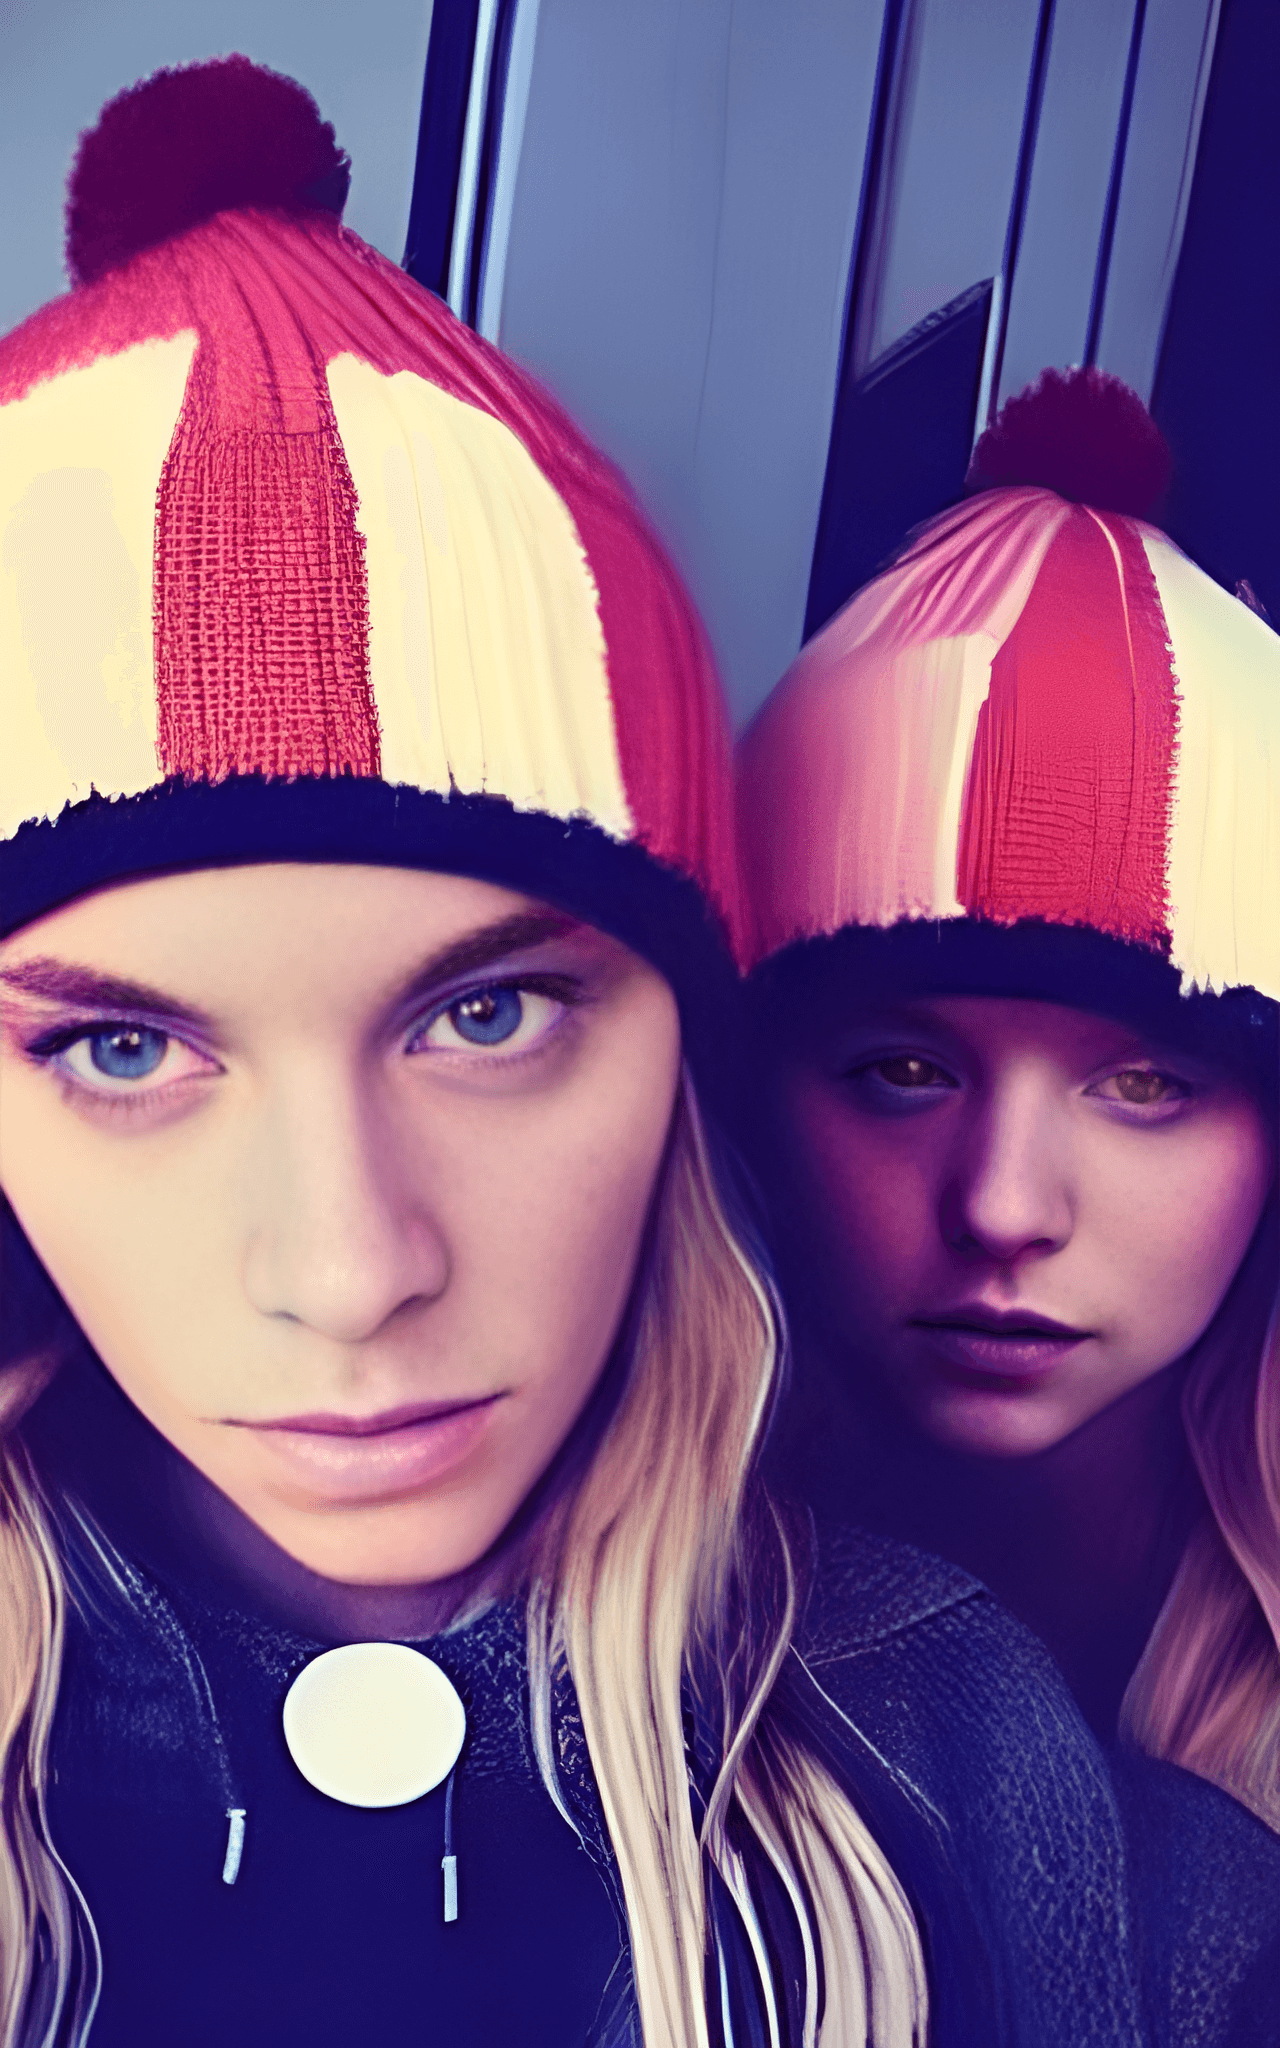 Two young women wearing matching red and white hats - VSCO